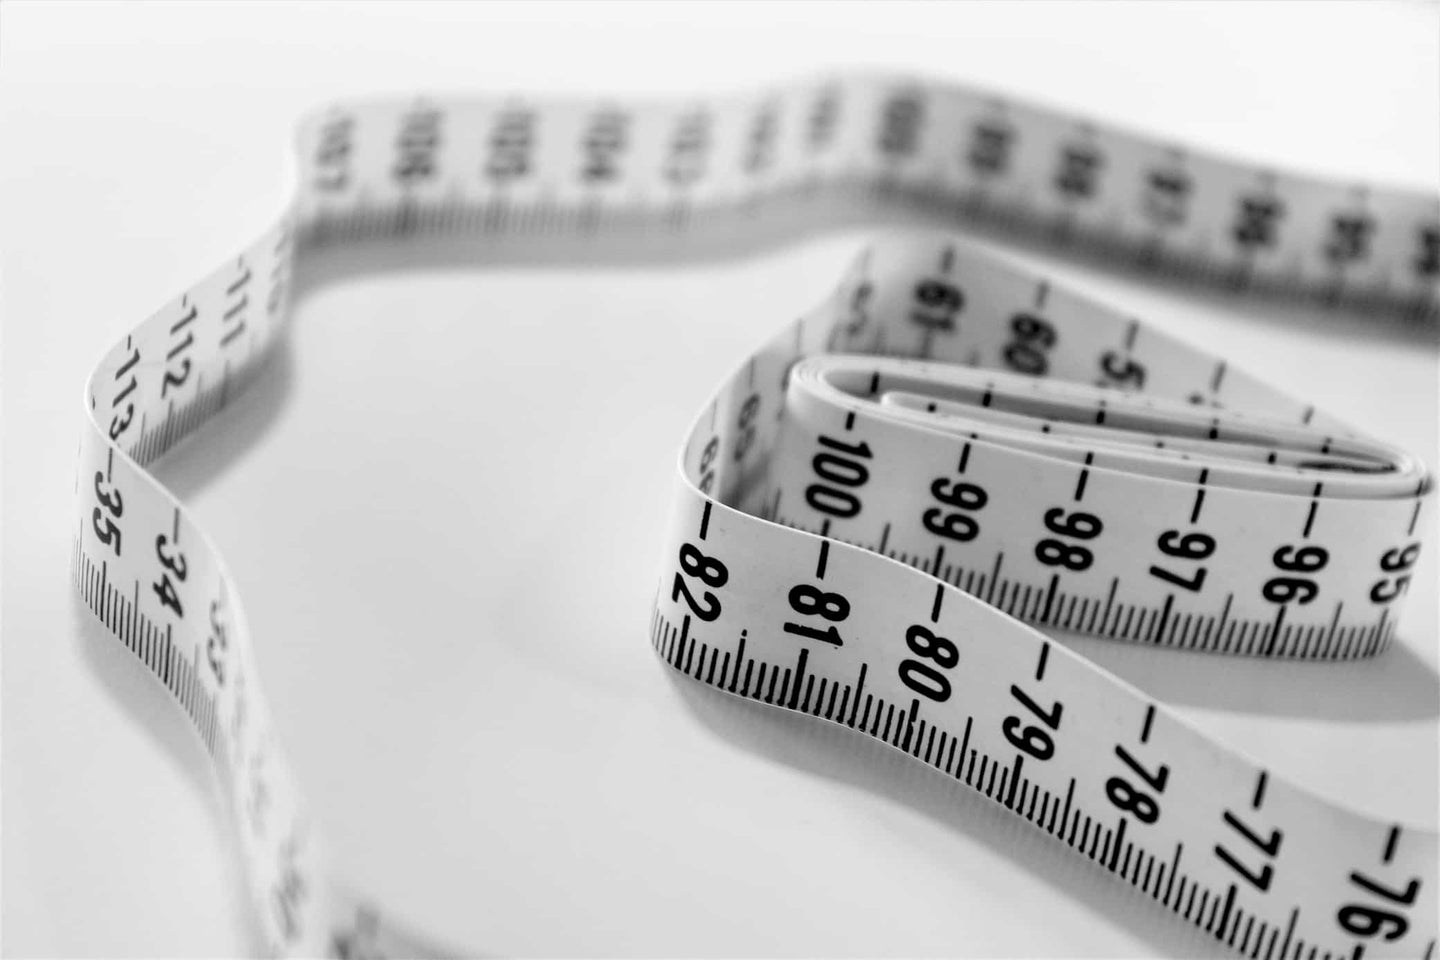 Dressmakers tape measure. We will make specifications for your garments along with many other services. Click to find out more about our services.  Fashion services include cad drawing, tech packs, trend forecast, fabric sourcing etc.